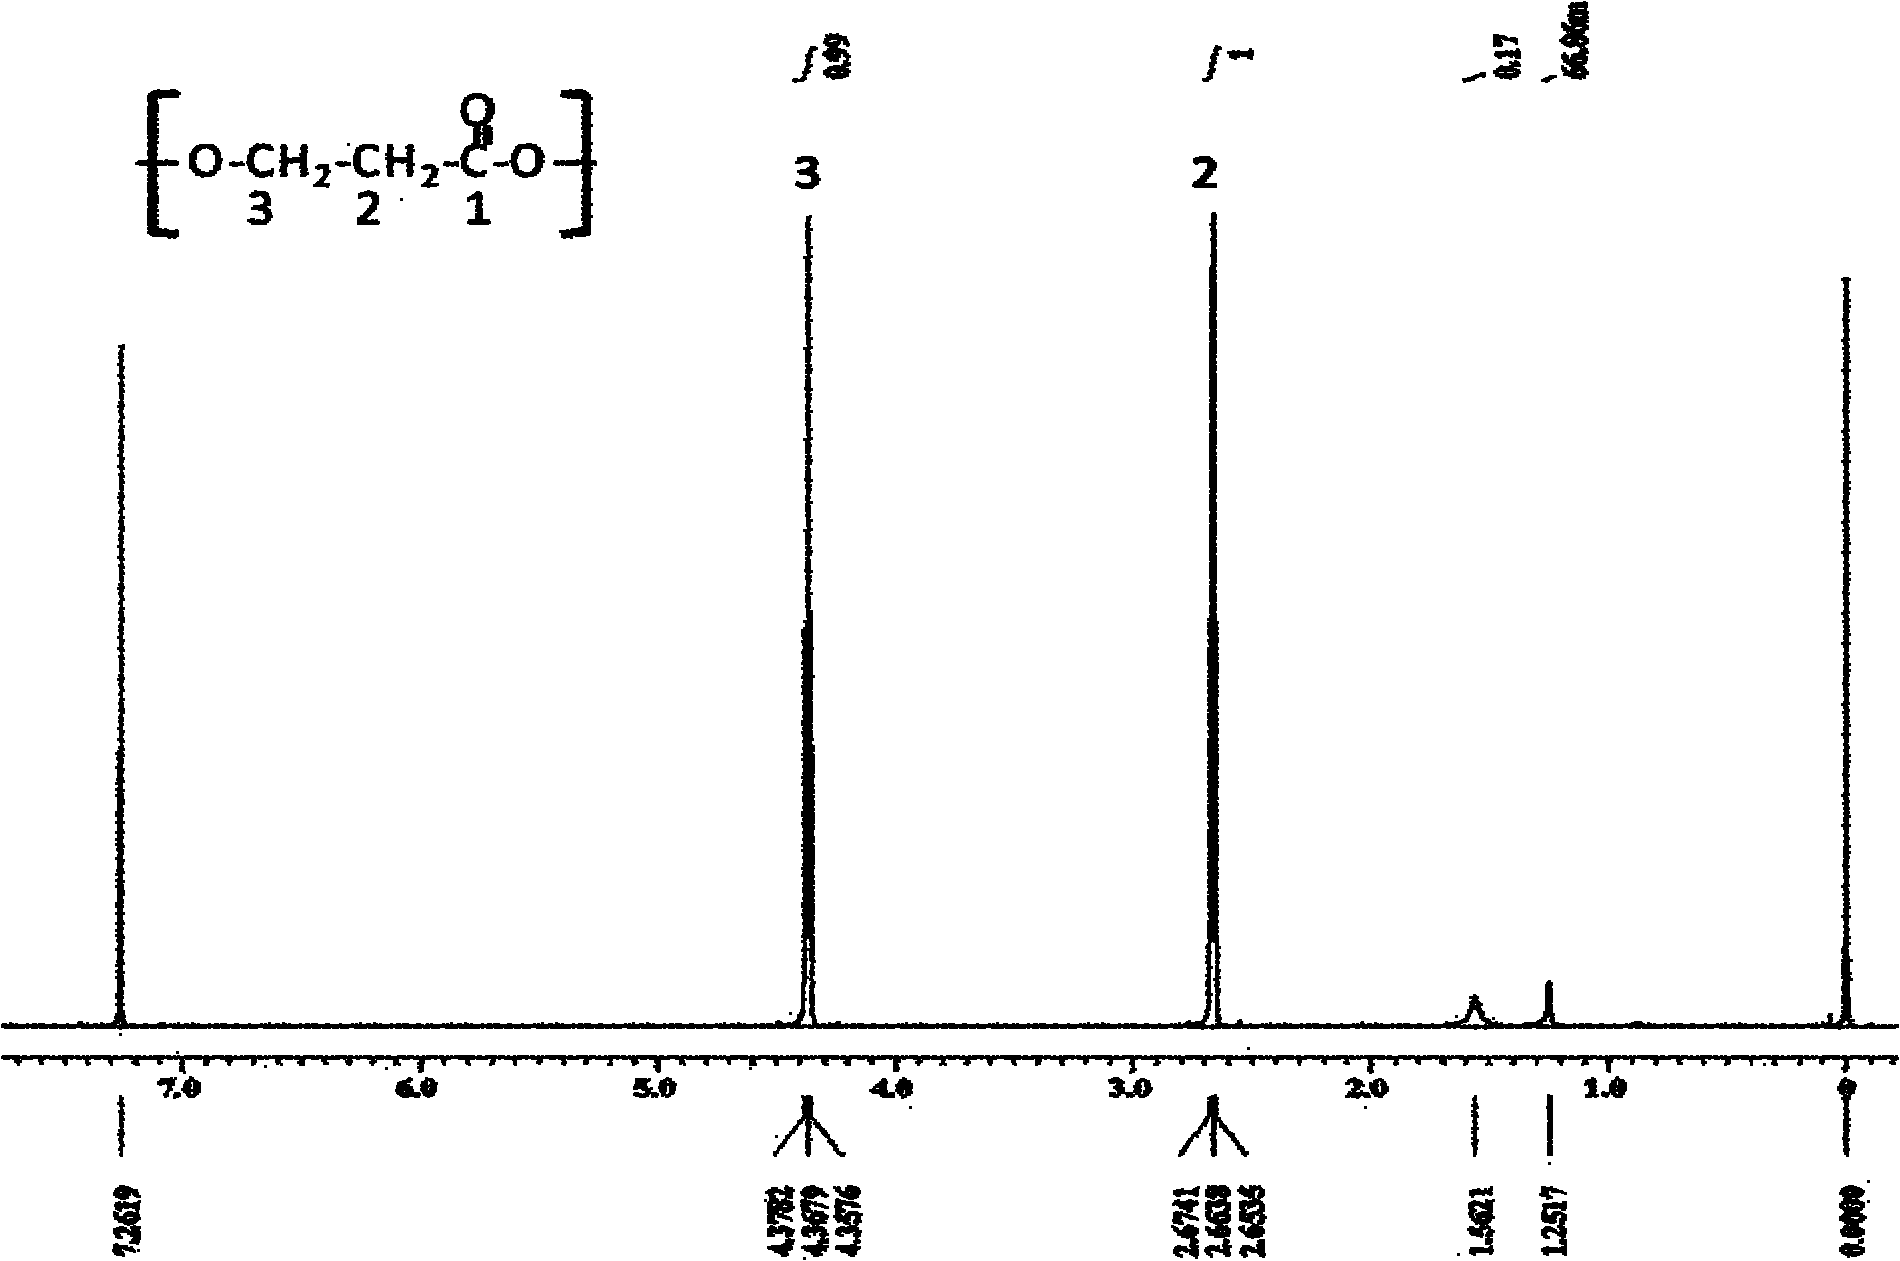 Recombinant strain for producing 3-hydracrylic acid homopolymer and/or 3-hydracrylic acid copolymer and application thereof